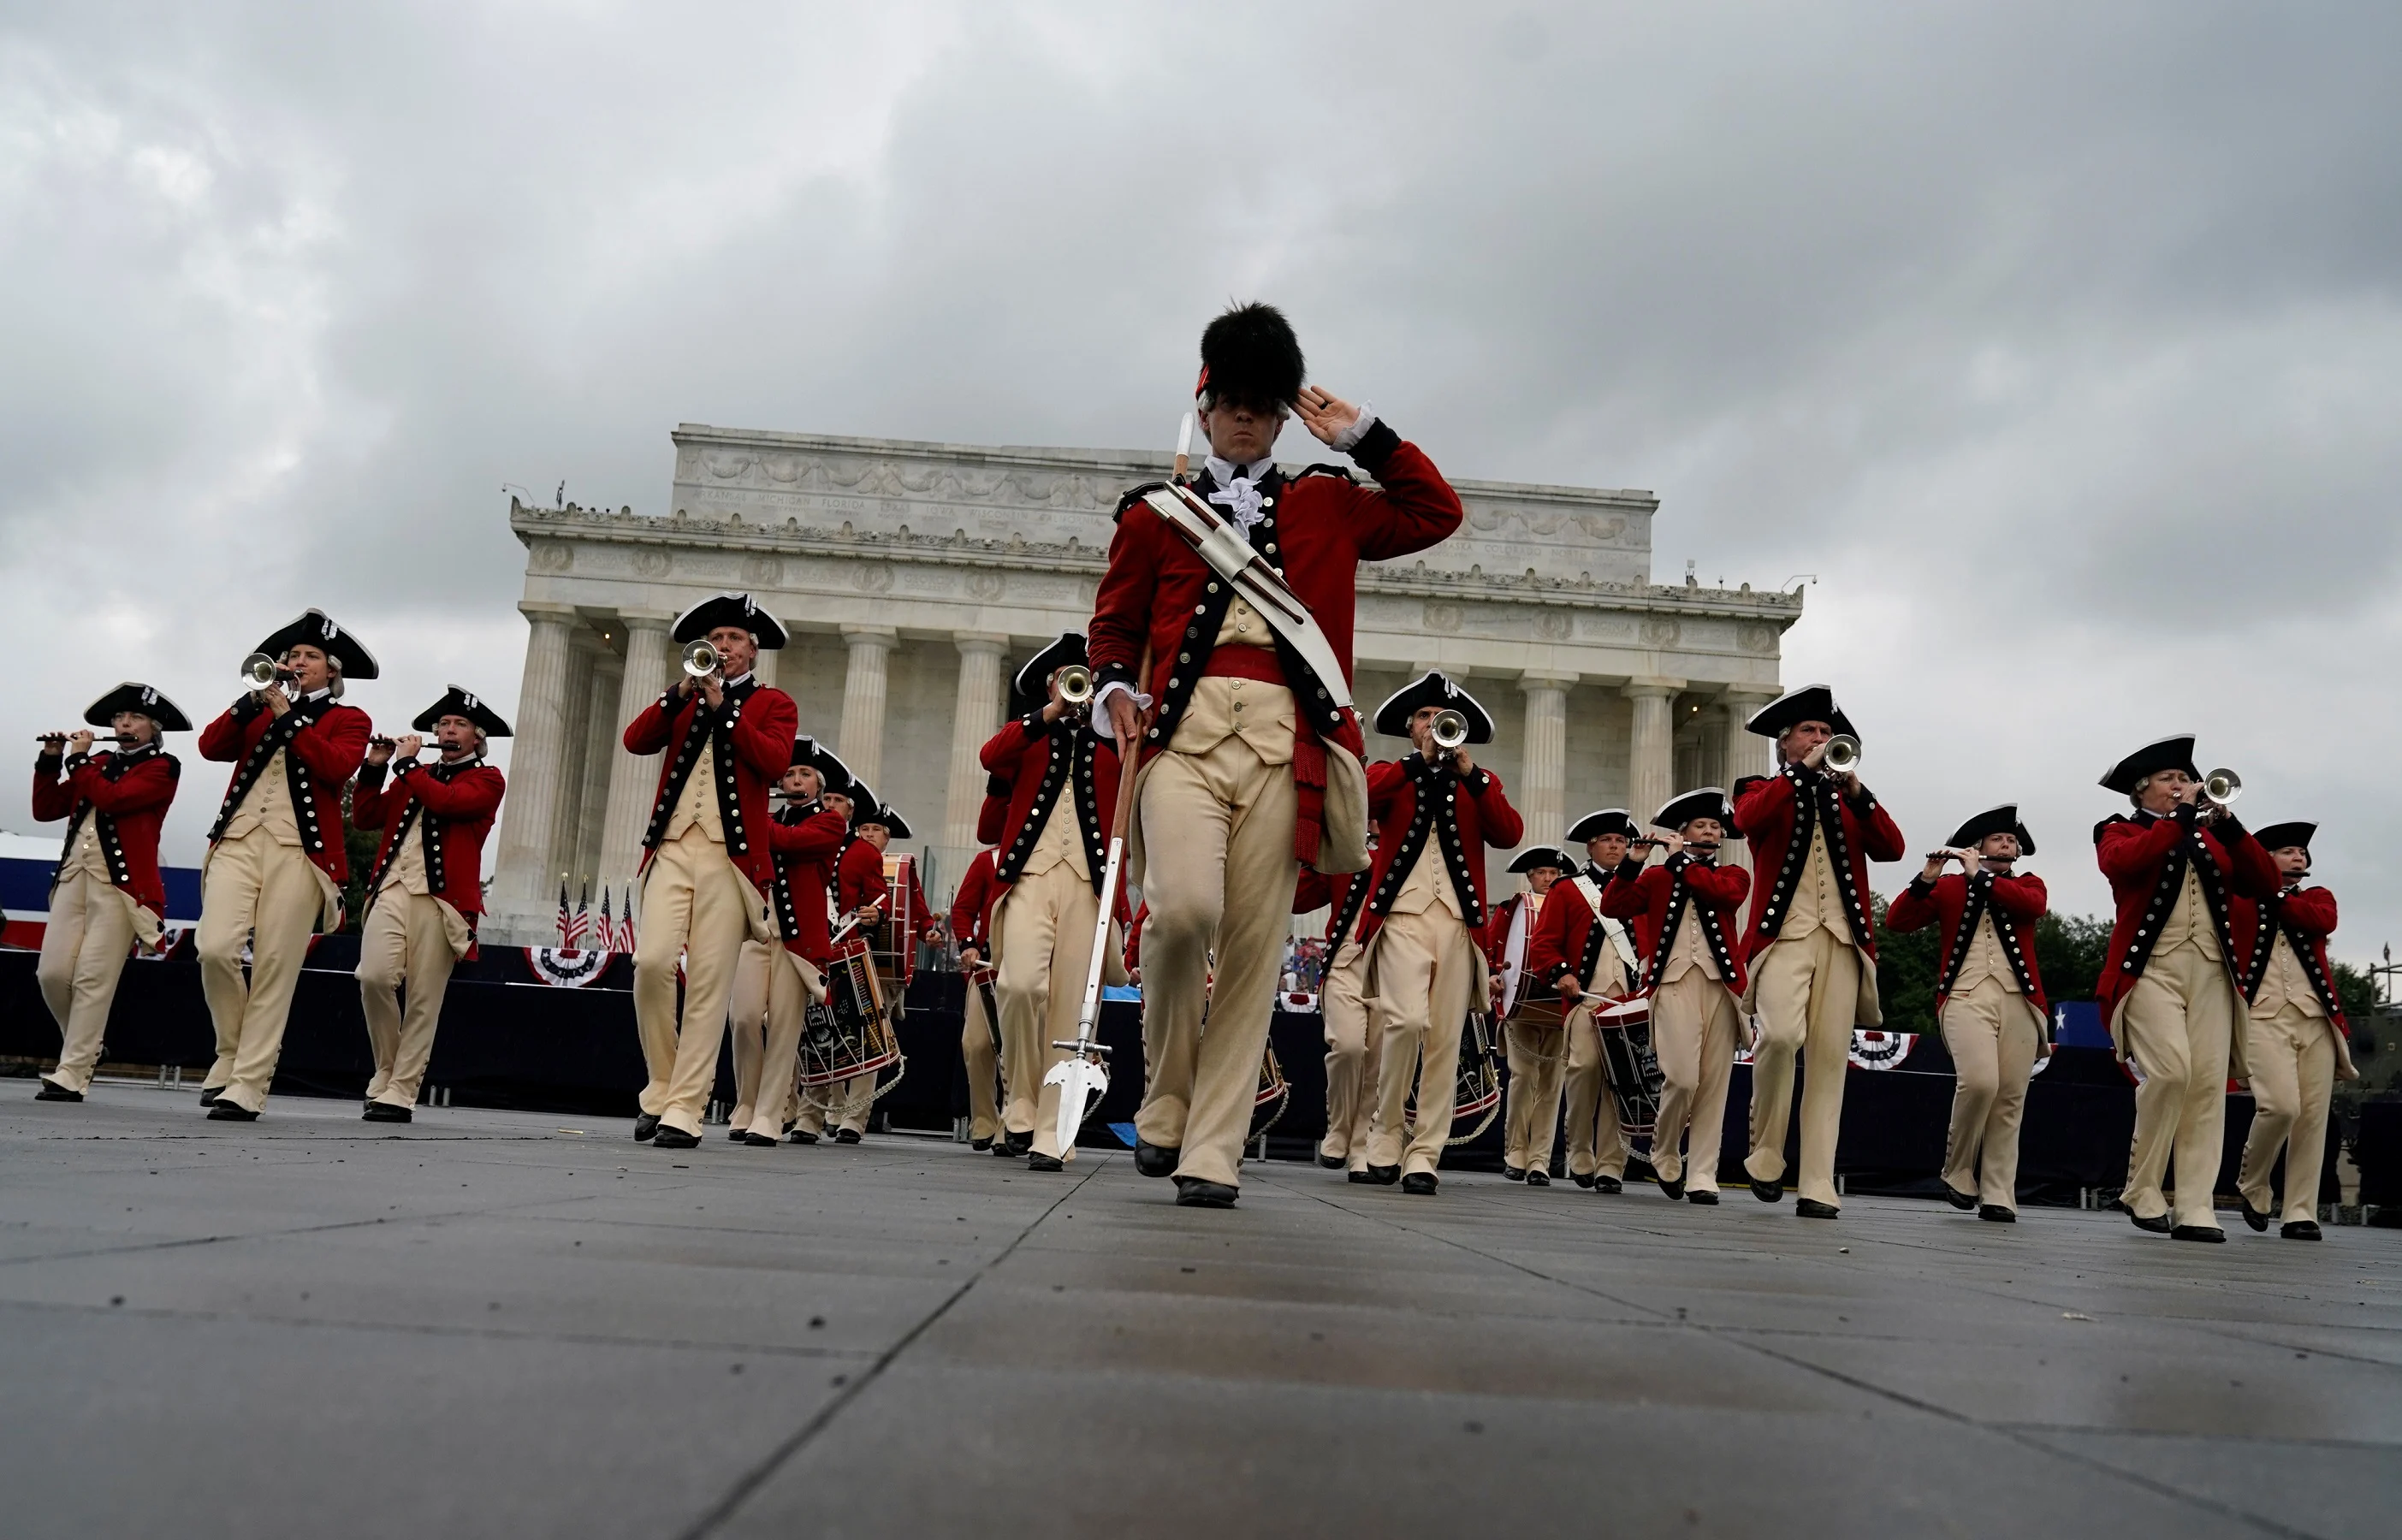 Fourth Of July Independence Day Celebrations In Washington